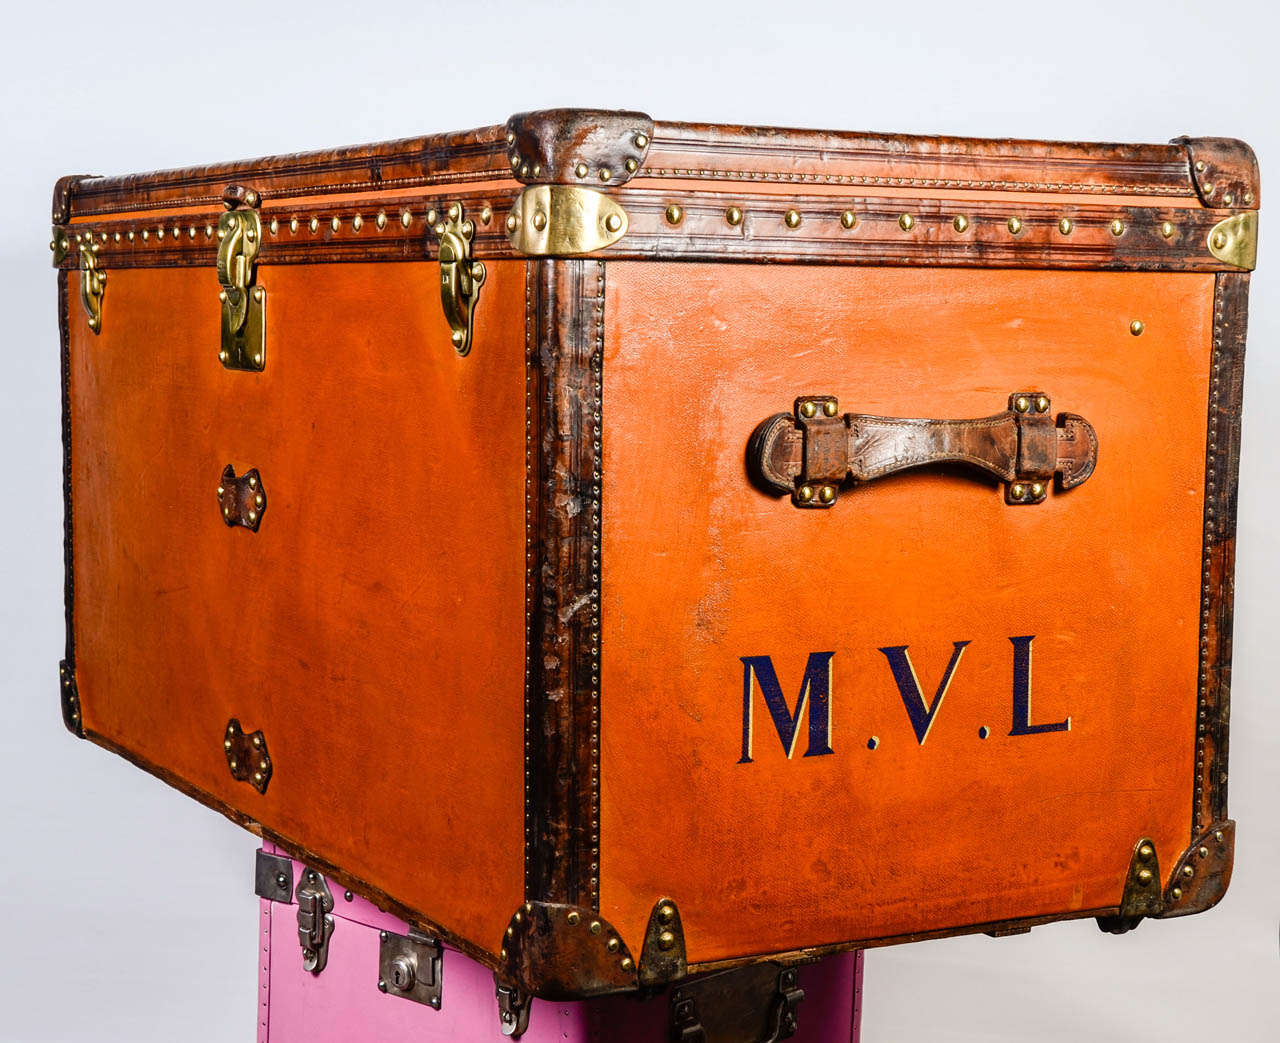 This unusual orange Vuittonite canvas courrier trunk has got all leather trim and handles,brass corners and locks.
The interior has been totally relined in beige fabric and still has its original 2 webbed baskets.
Superb condition.